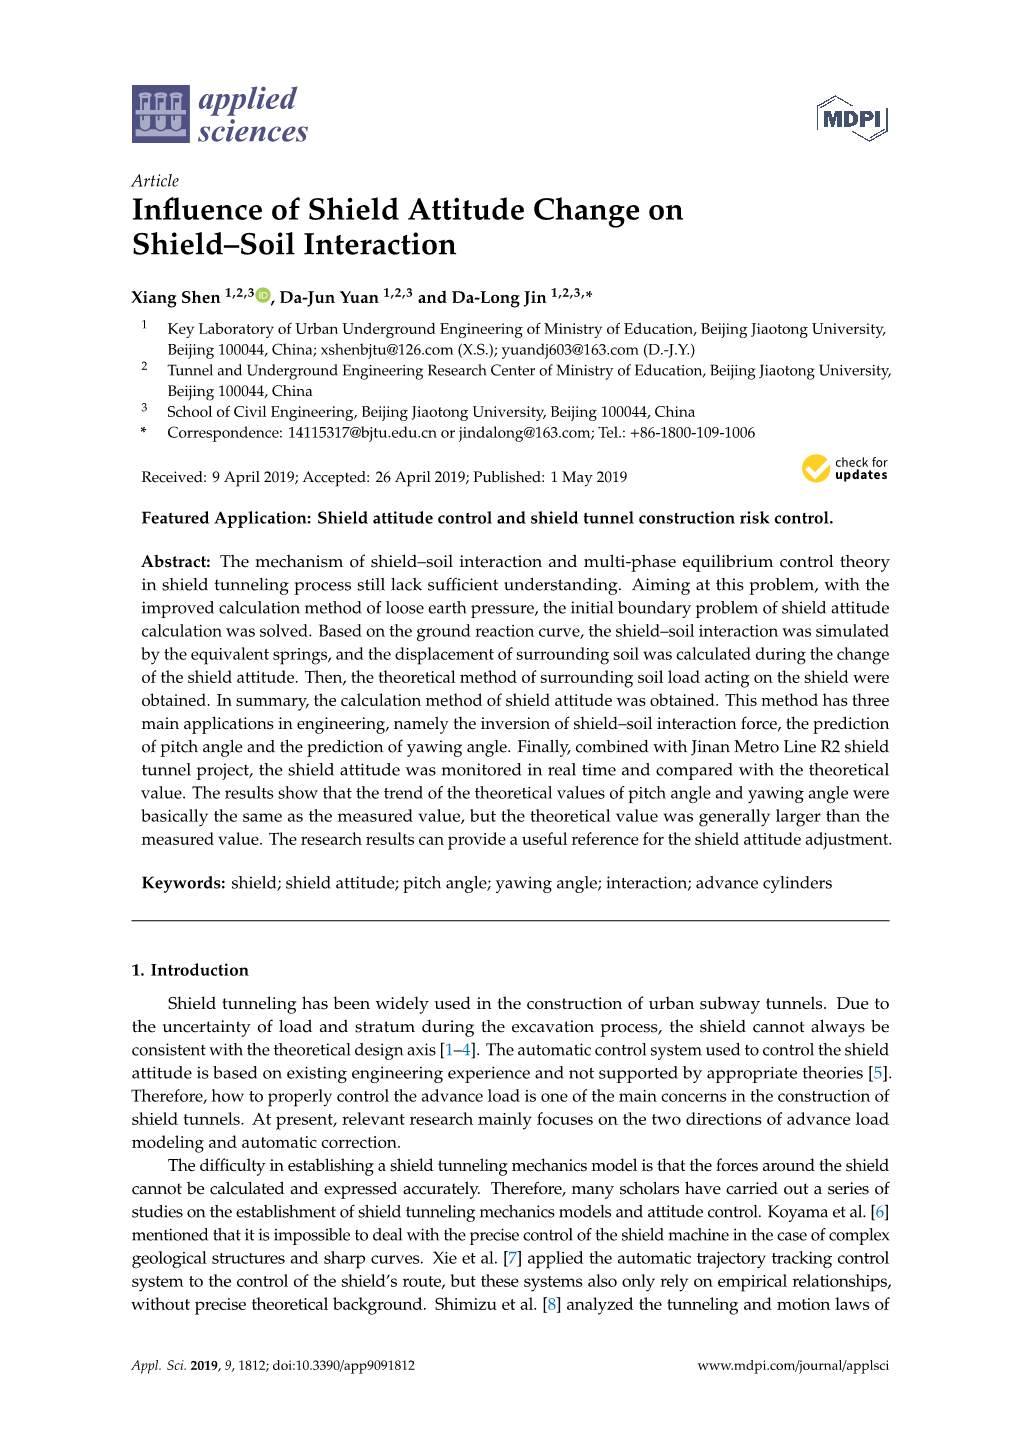 Influence of Shield Attitude Change on Shield–Soil Interaction